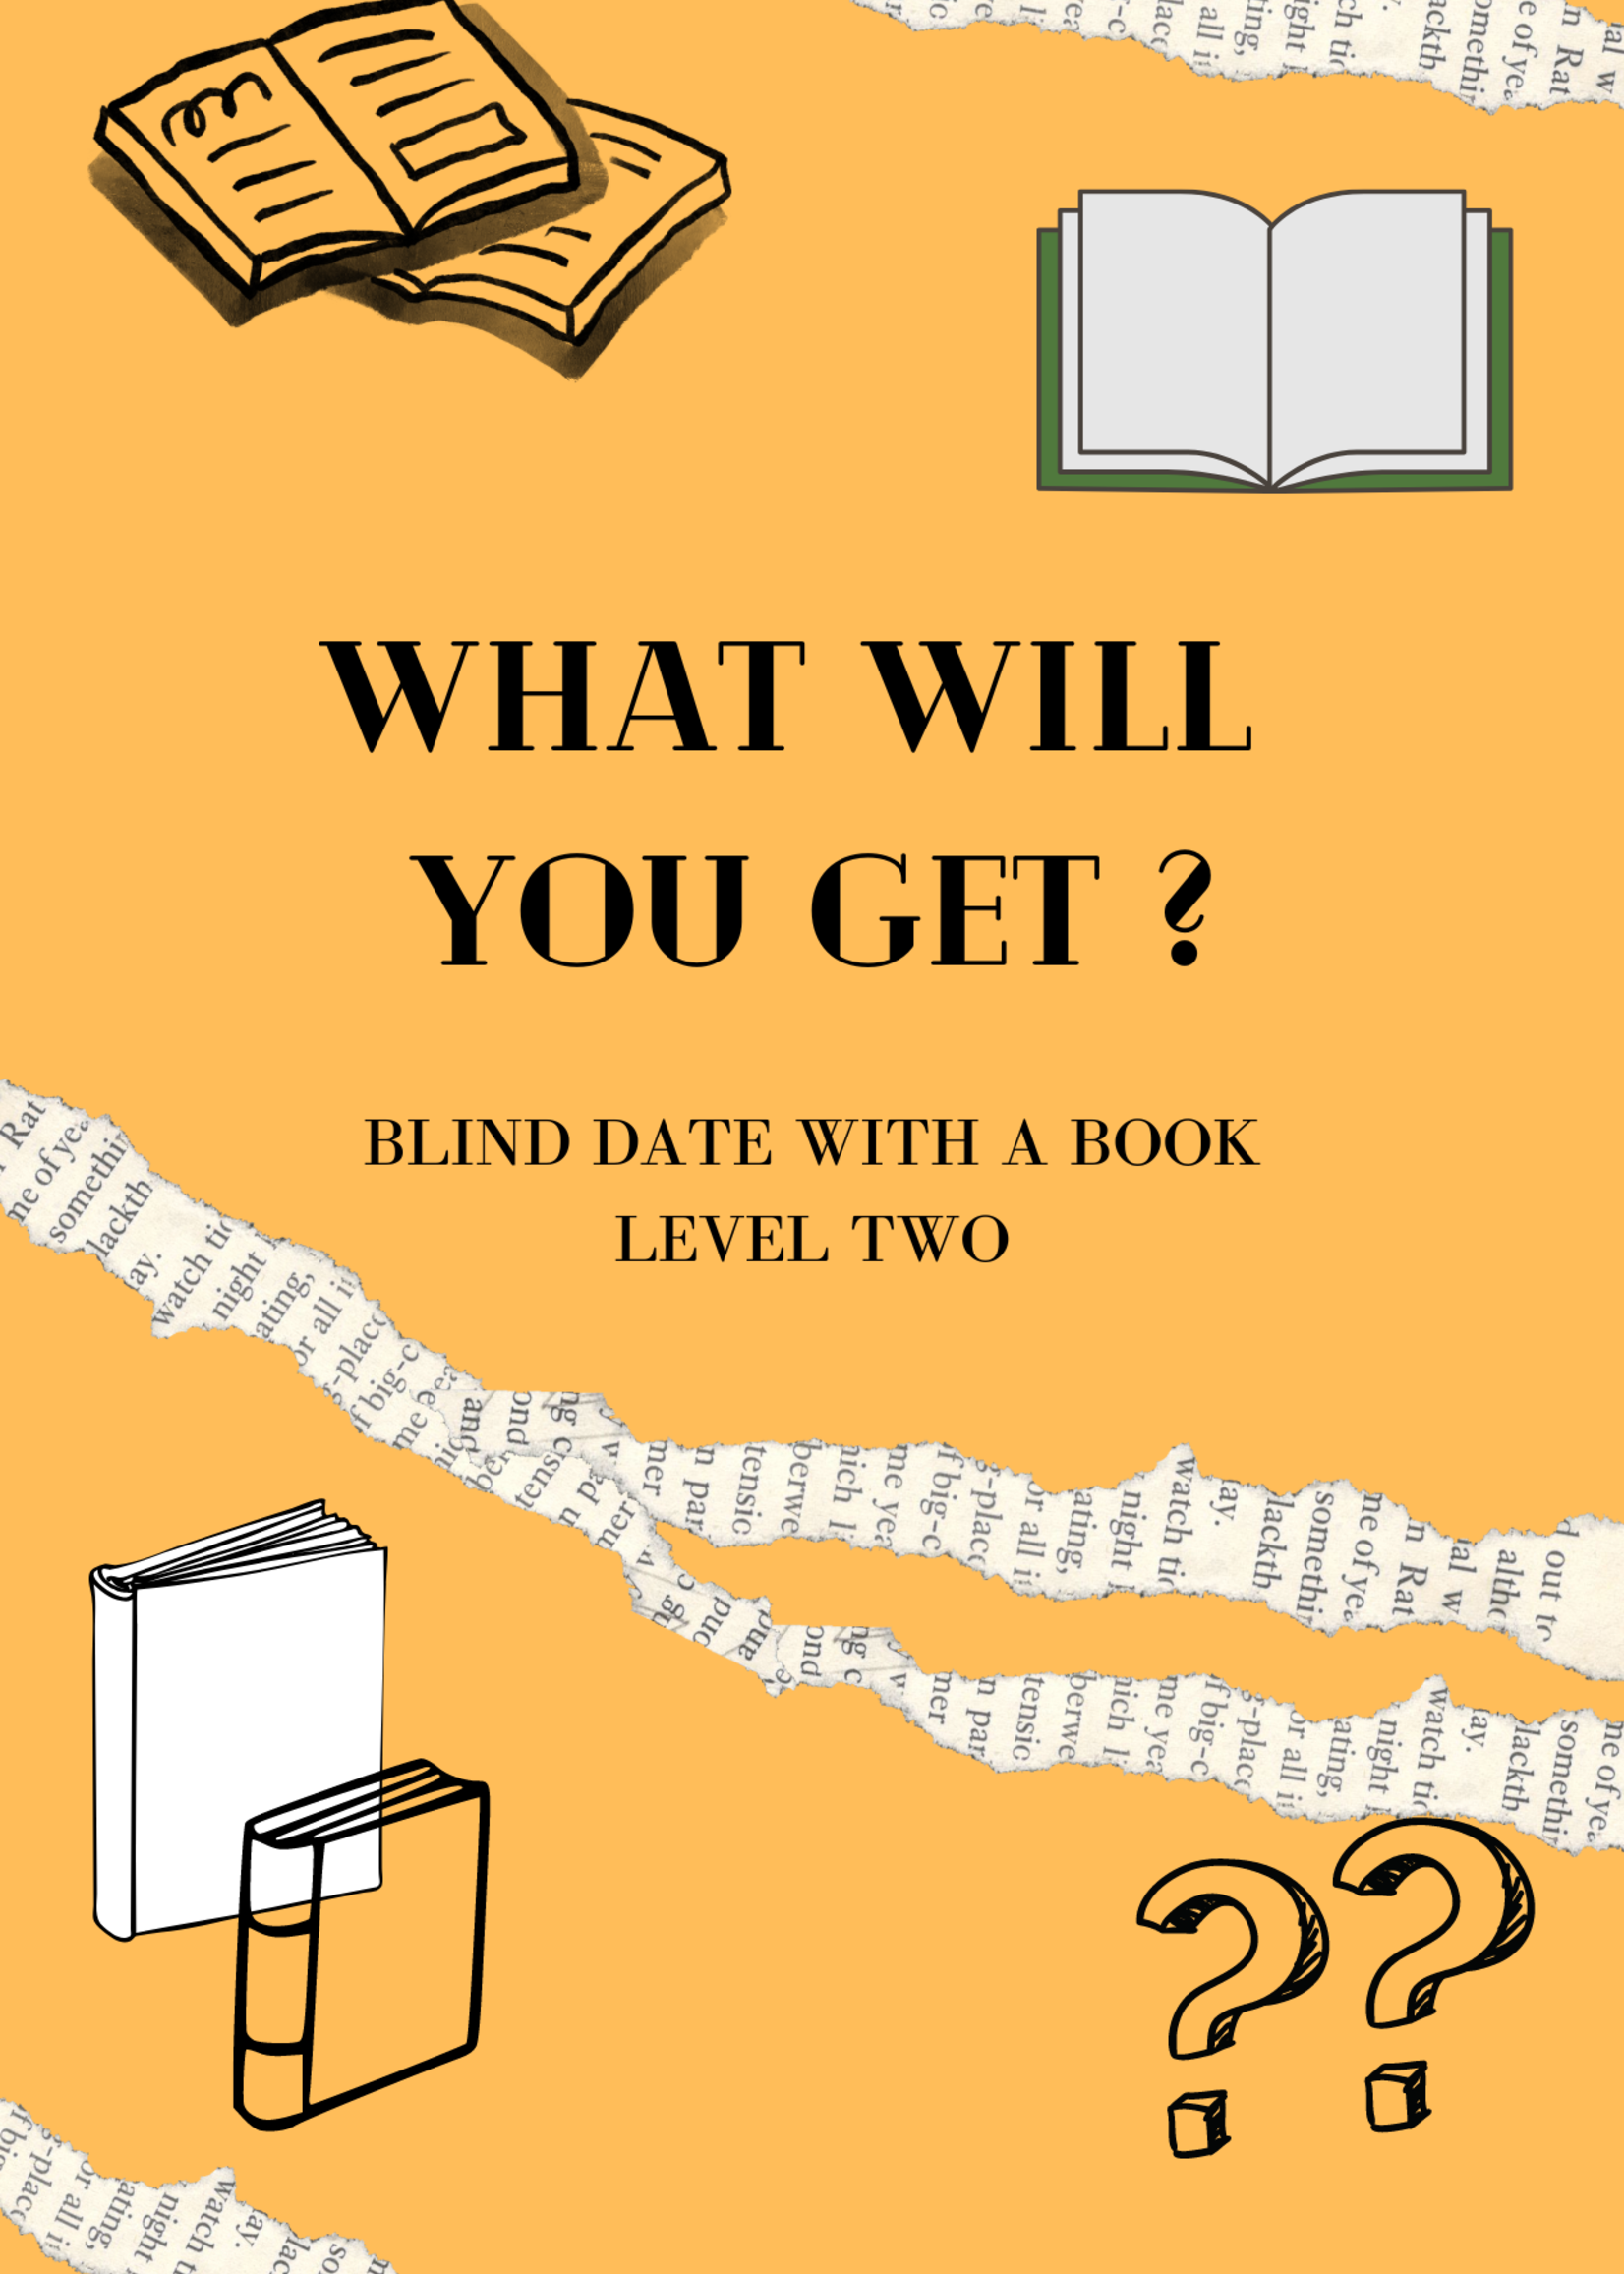 ONLINE BLIND DATE WITH A BOOK - LEVEL 2